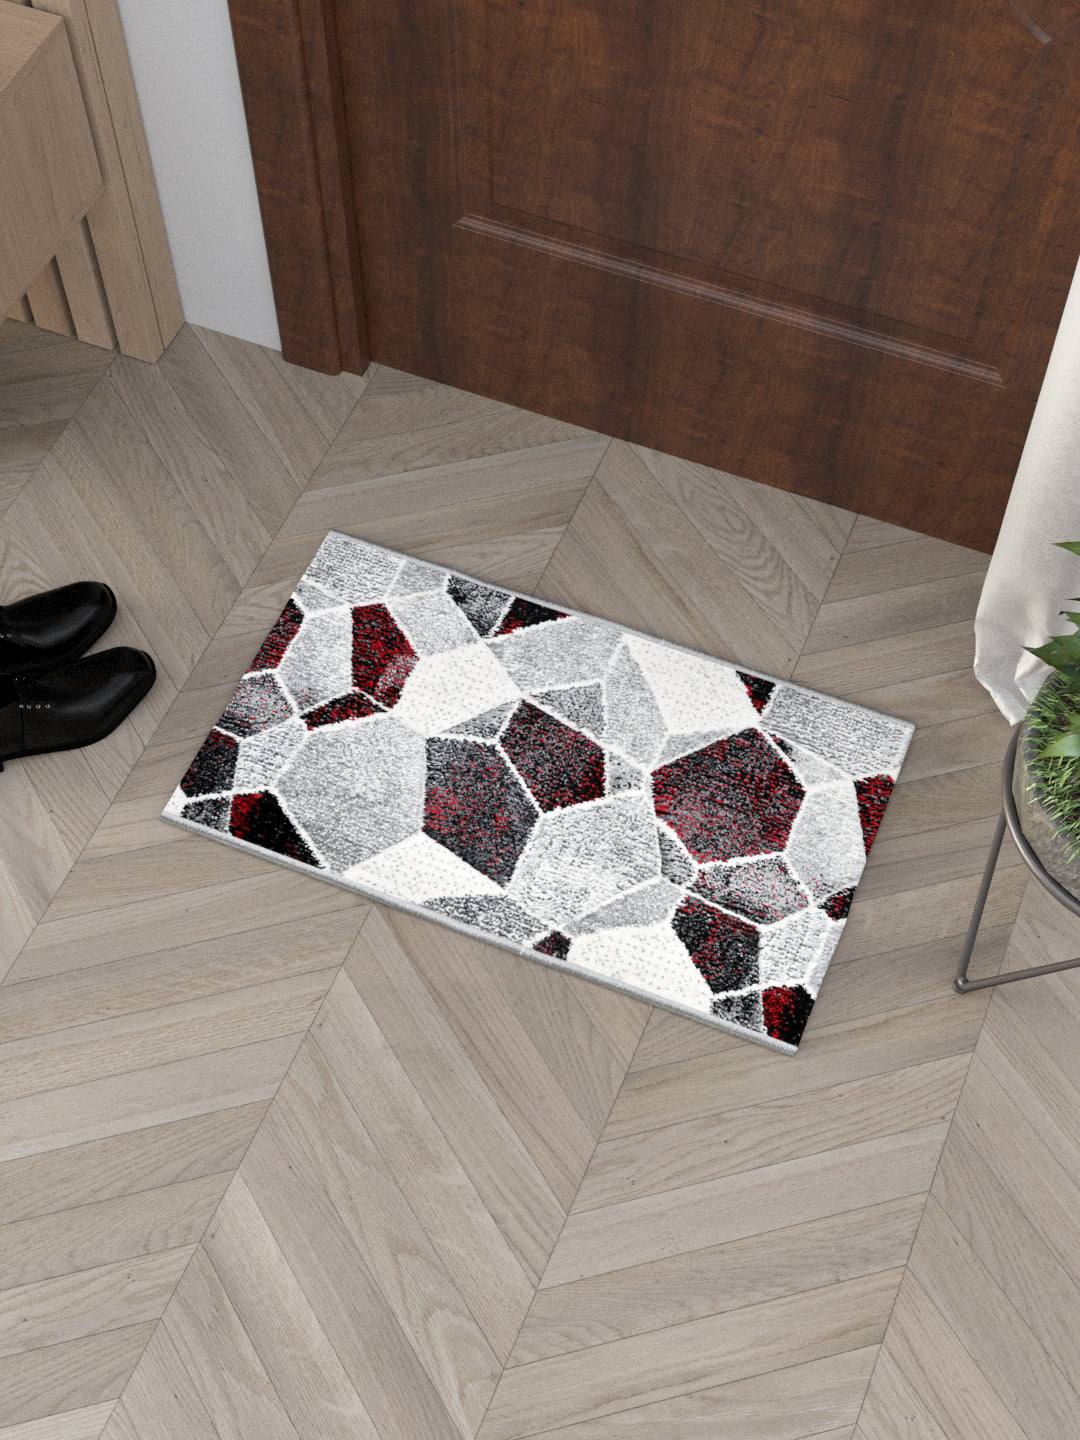 Doormat With Anti Skid Backing; 16x24 Inches; Grey White Geometric